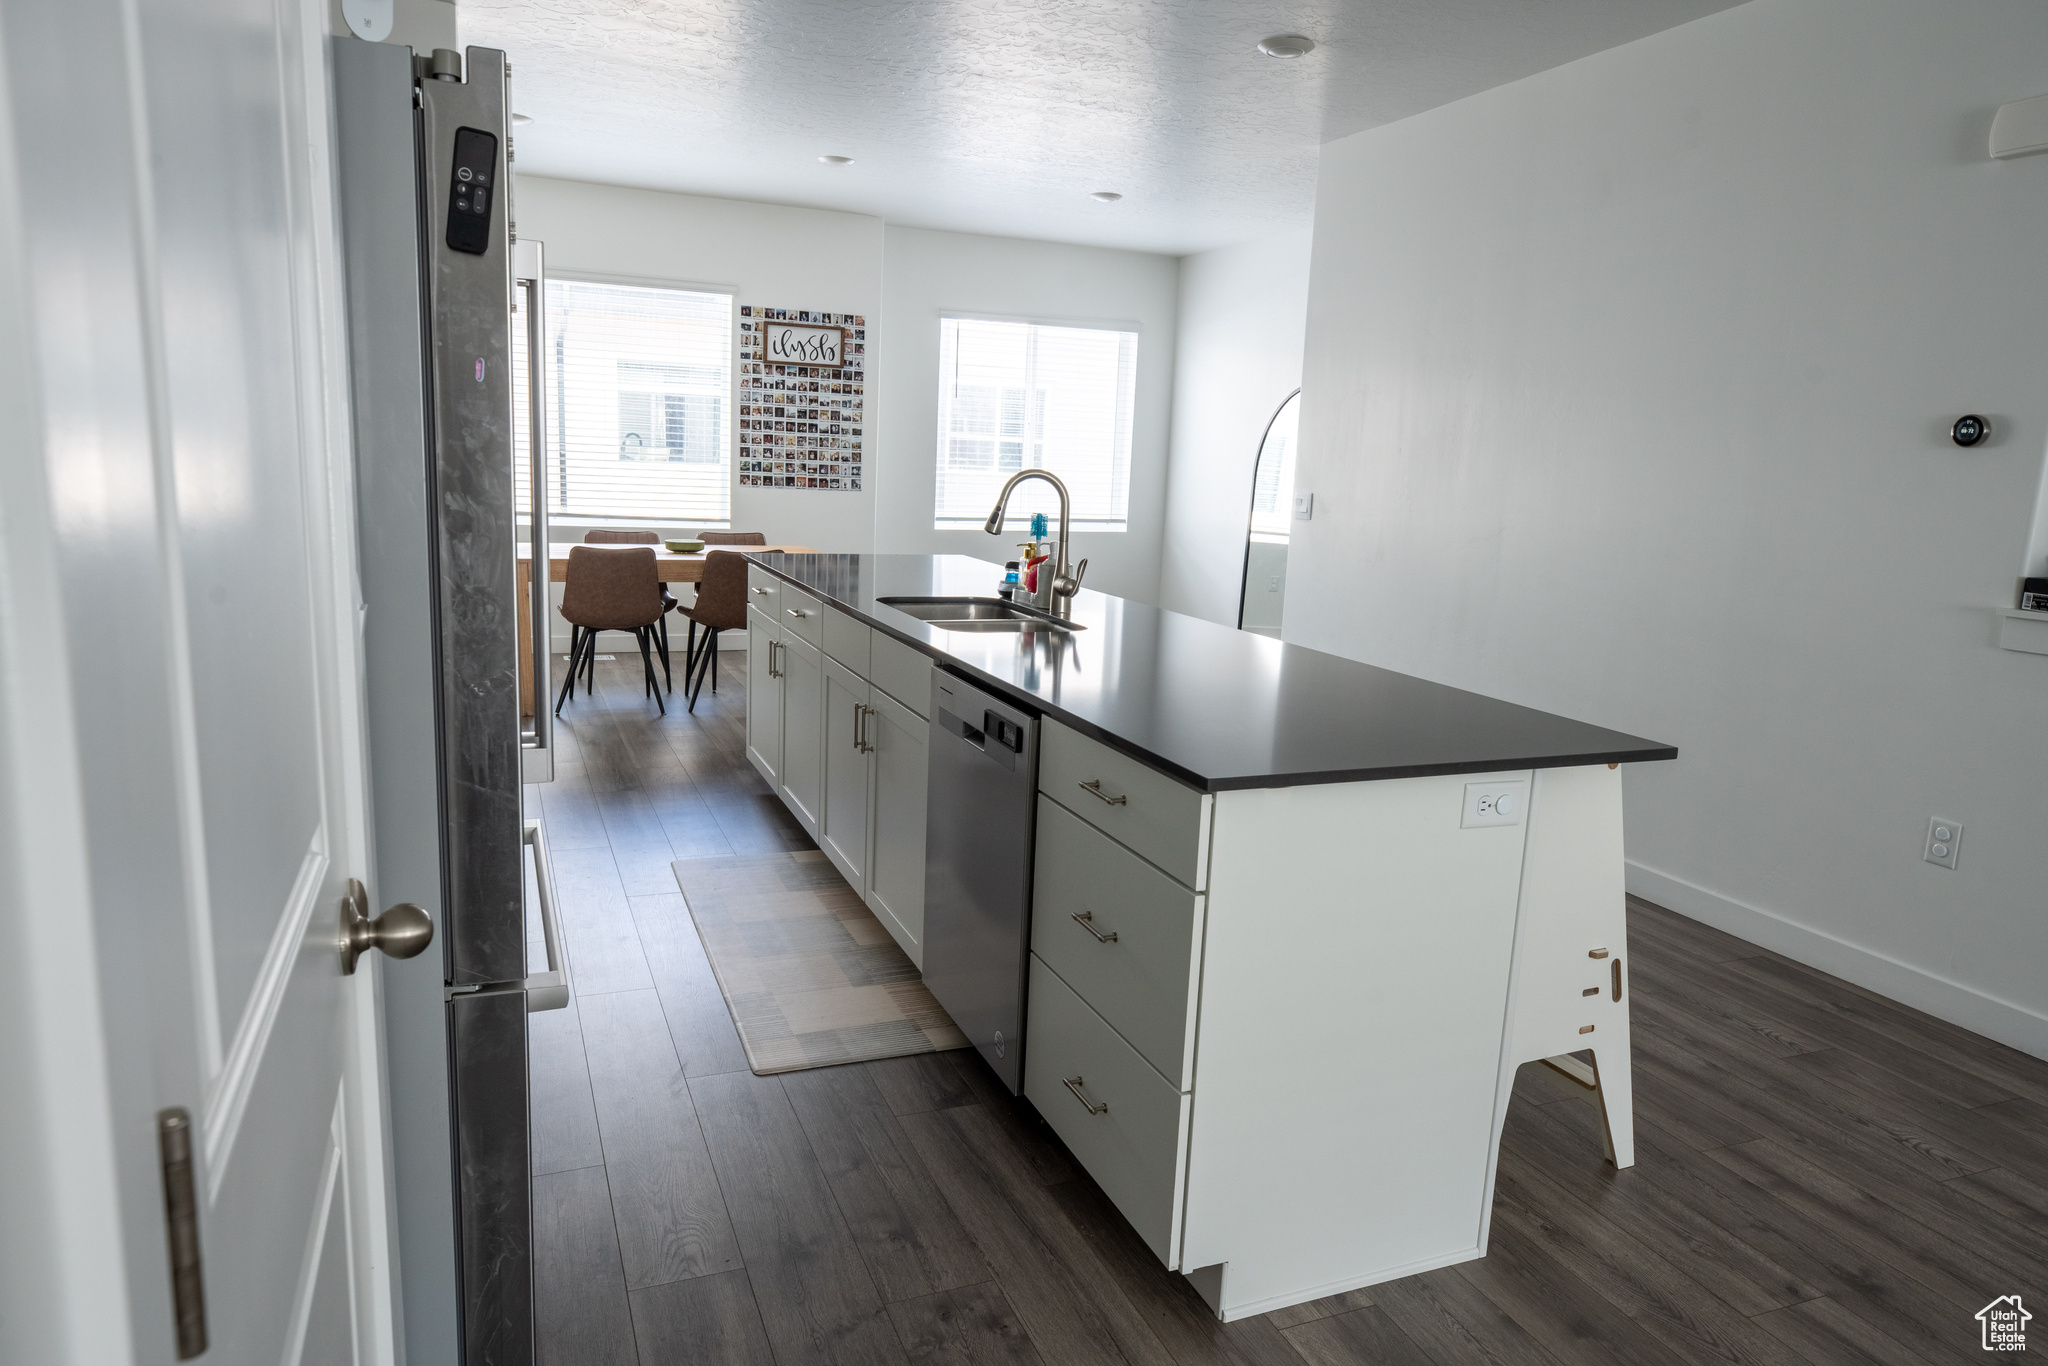 Kitchen featuring sink, dark wood-type flooring, white cabinetry, and a kitchen island with sink